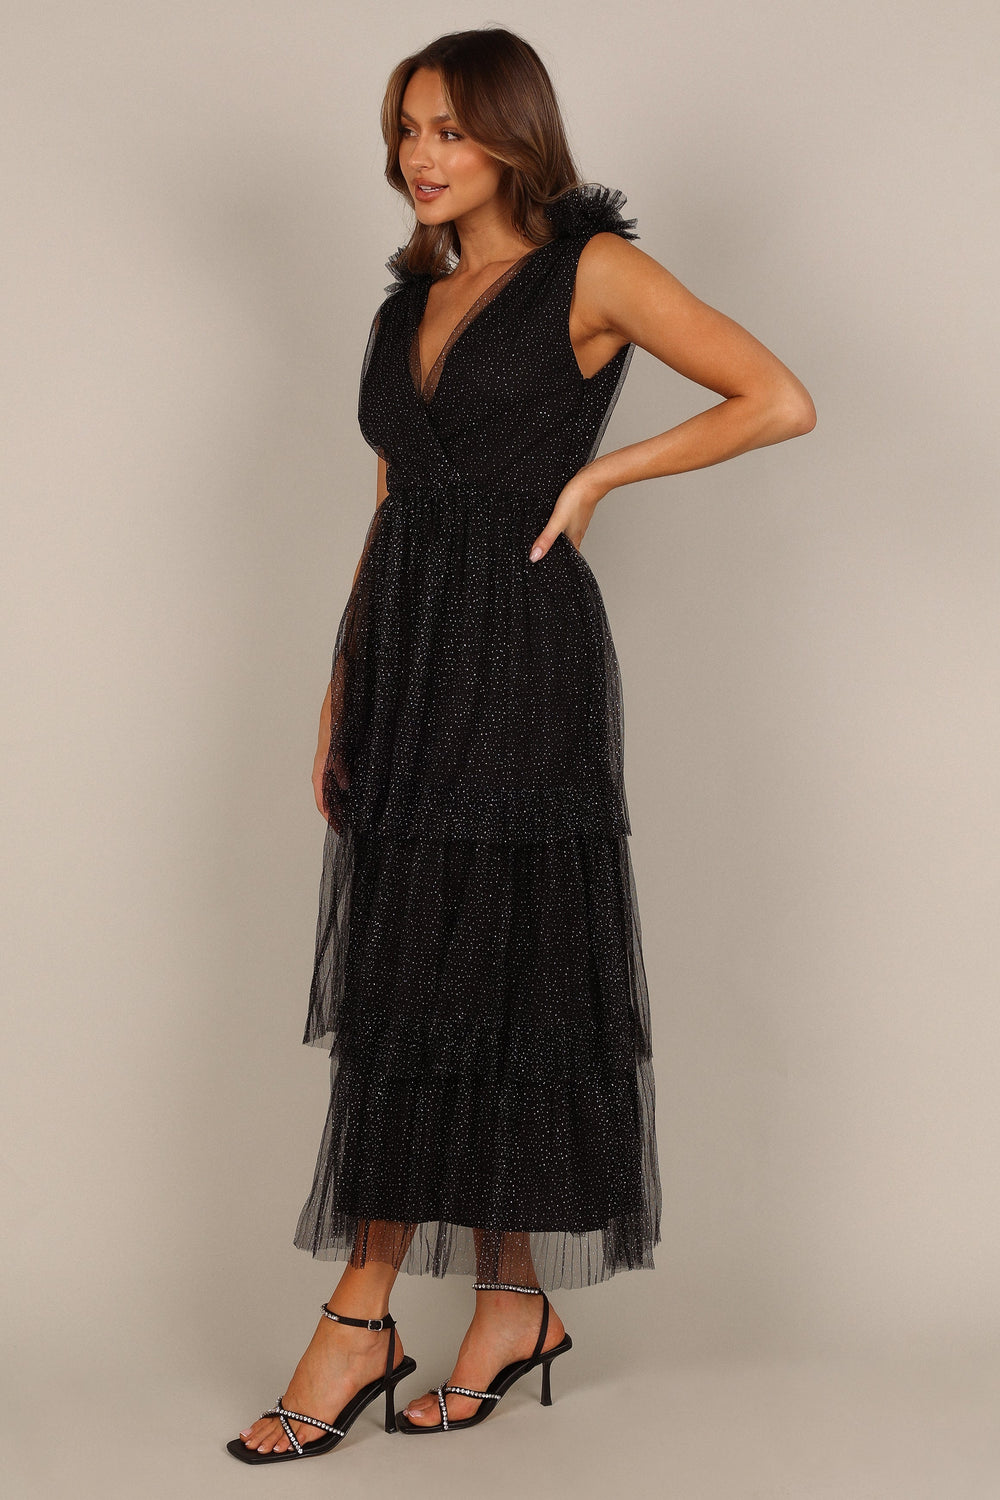 Petal and Pup USA DRESSES Asteria Tulle tiered Maxi Dress - Black Sparkle